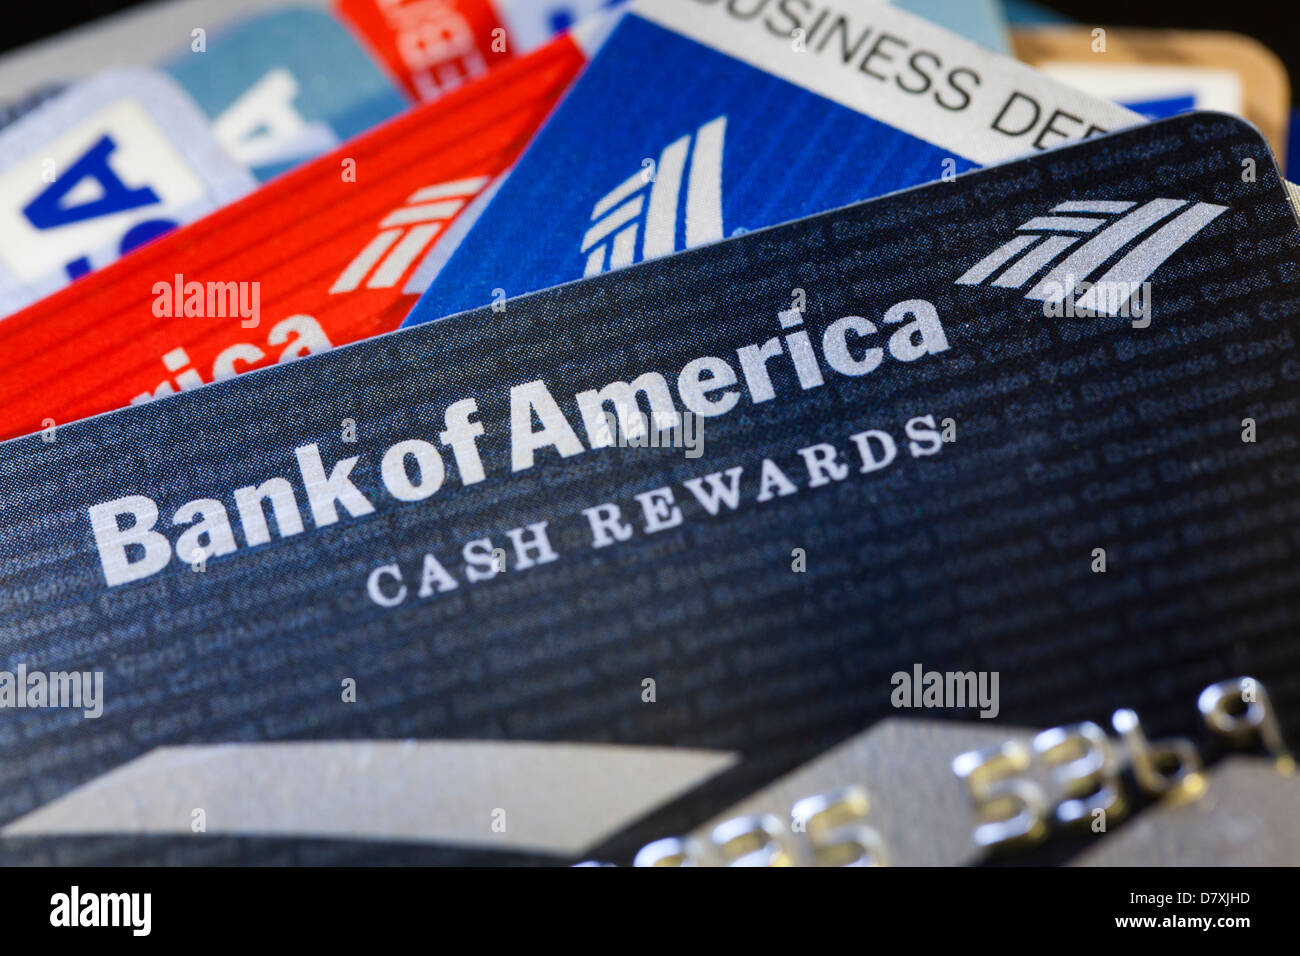 Bank of America credit card Stock Photo